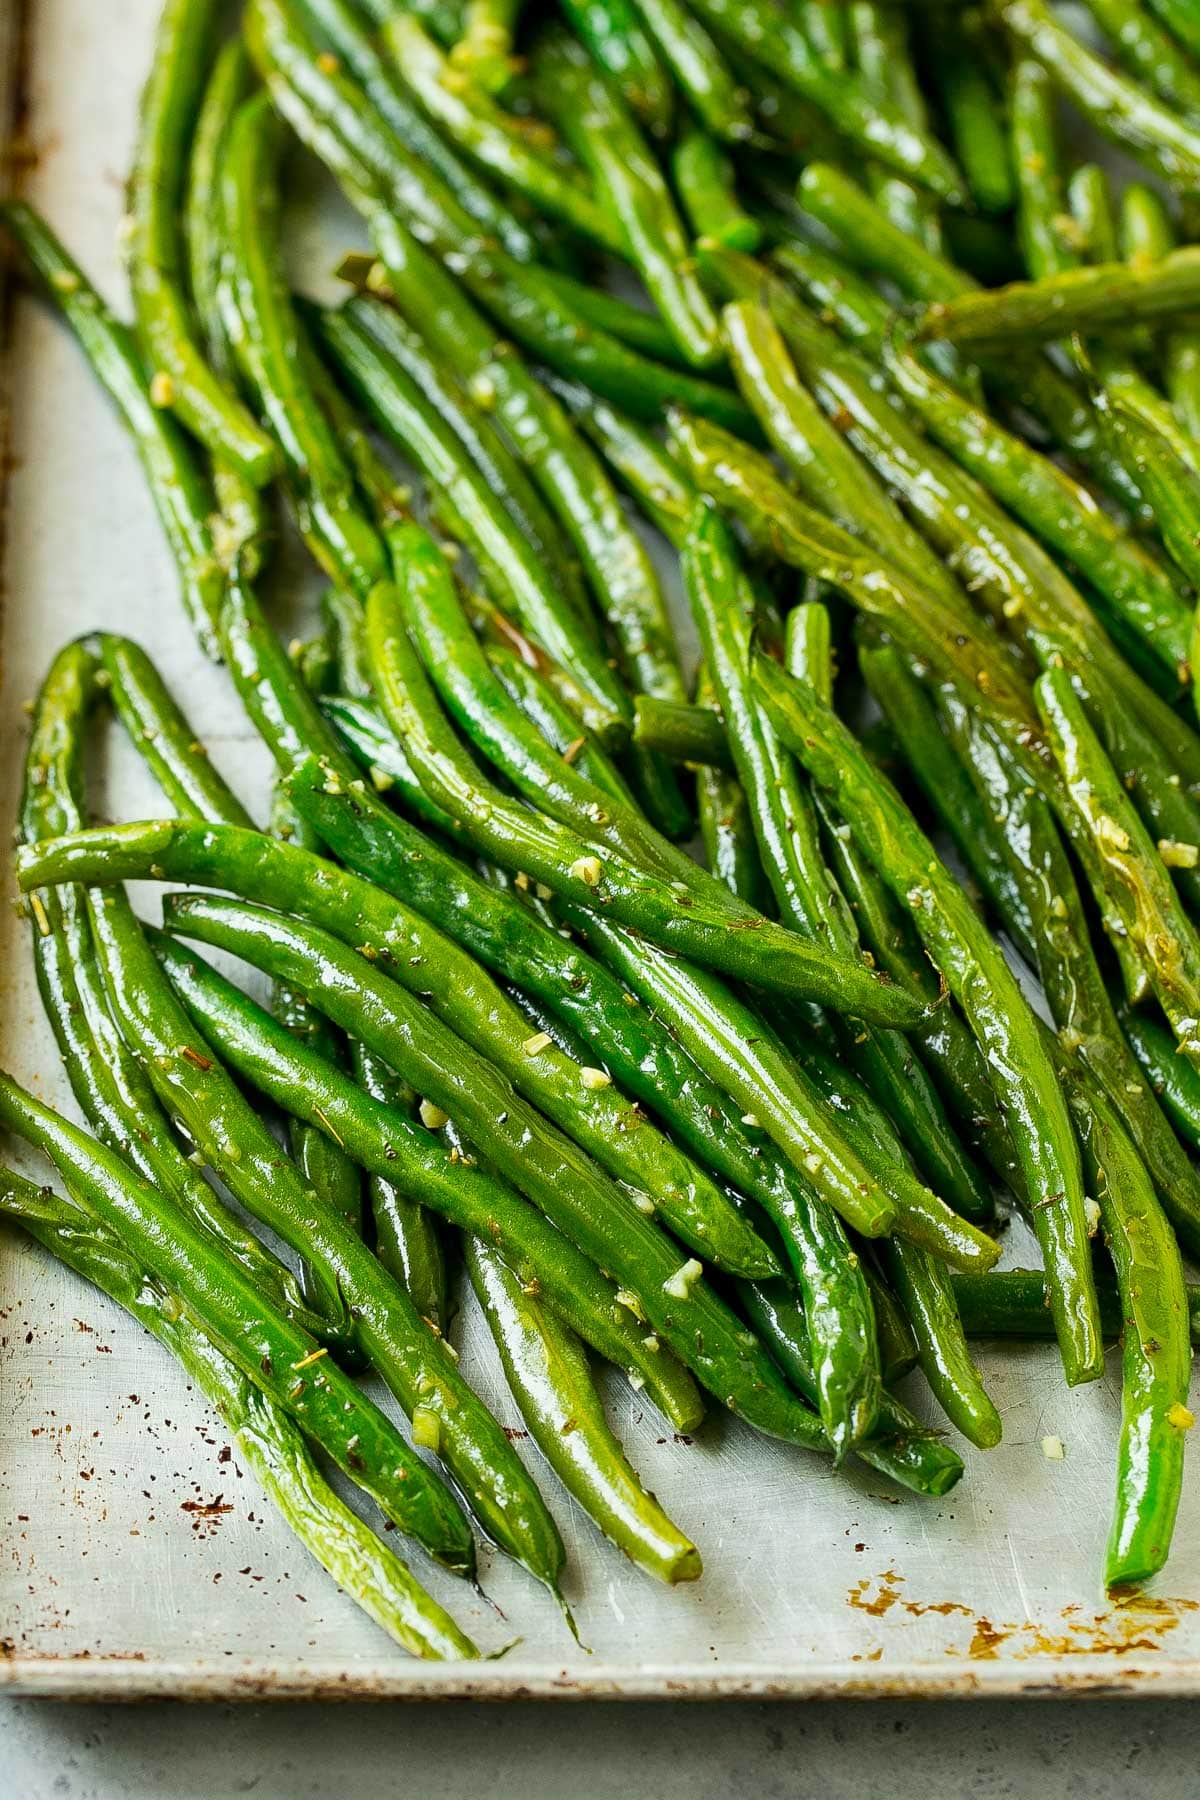 Green beans cooked on a sheet pan.